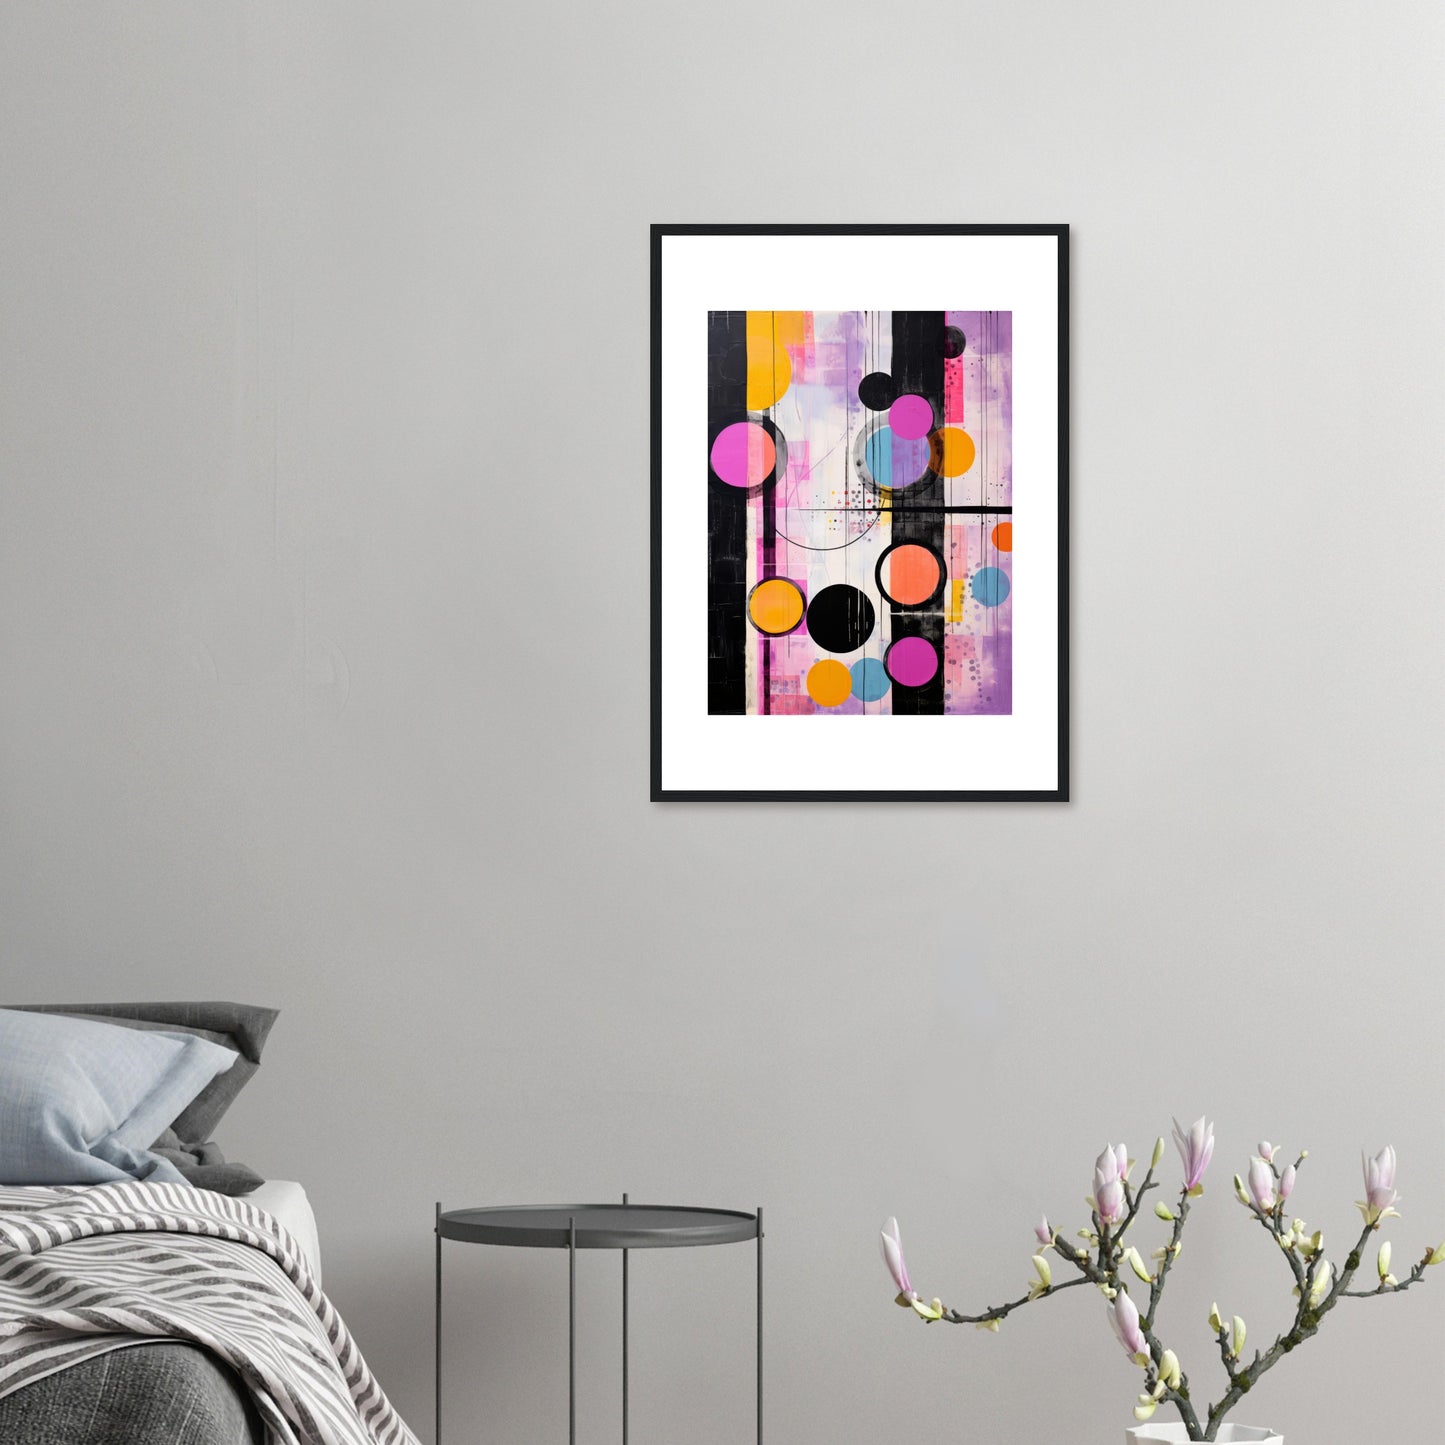 Back Then - Modern Abstract Wall Art Print Pink and Black